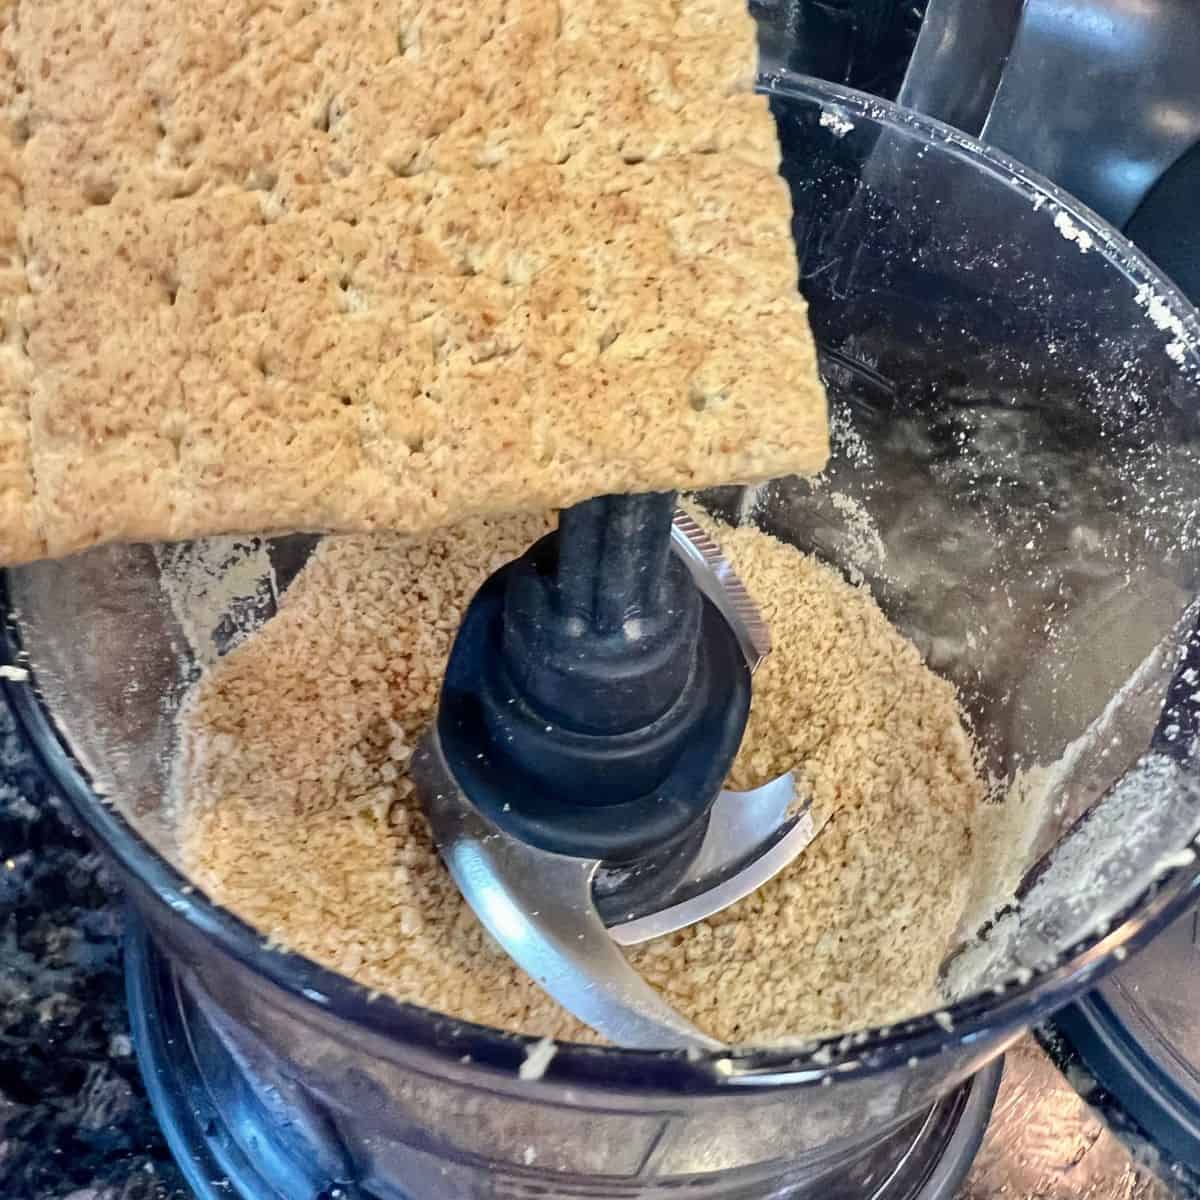 a graham cracker being placed in a mini ninja food processor